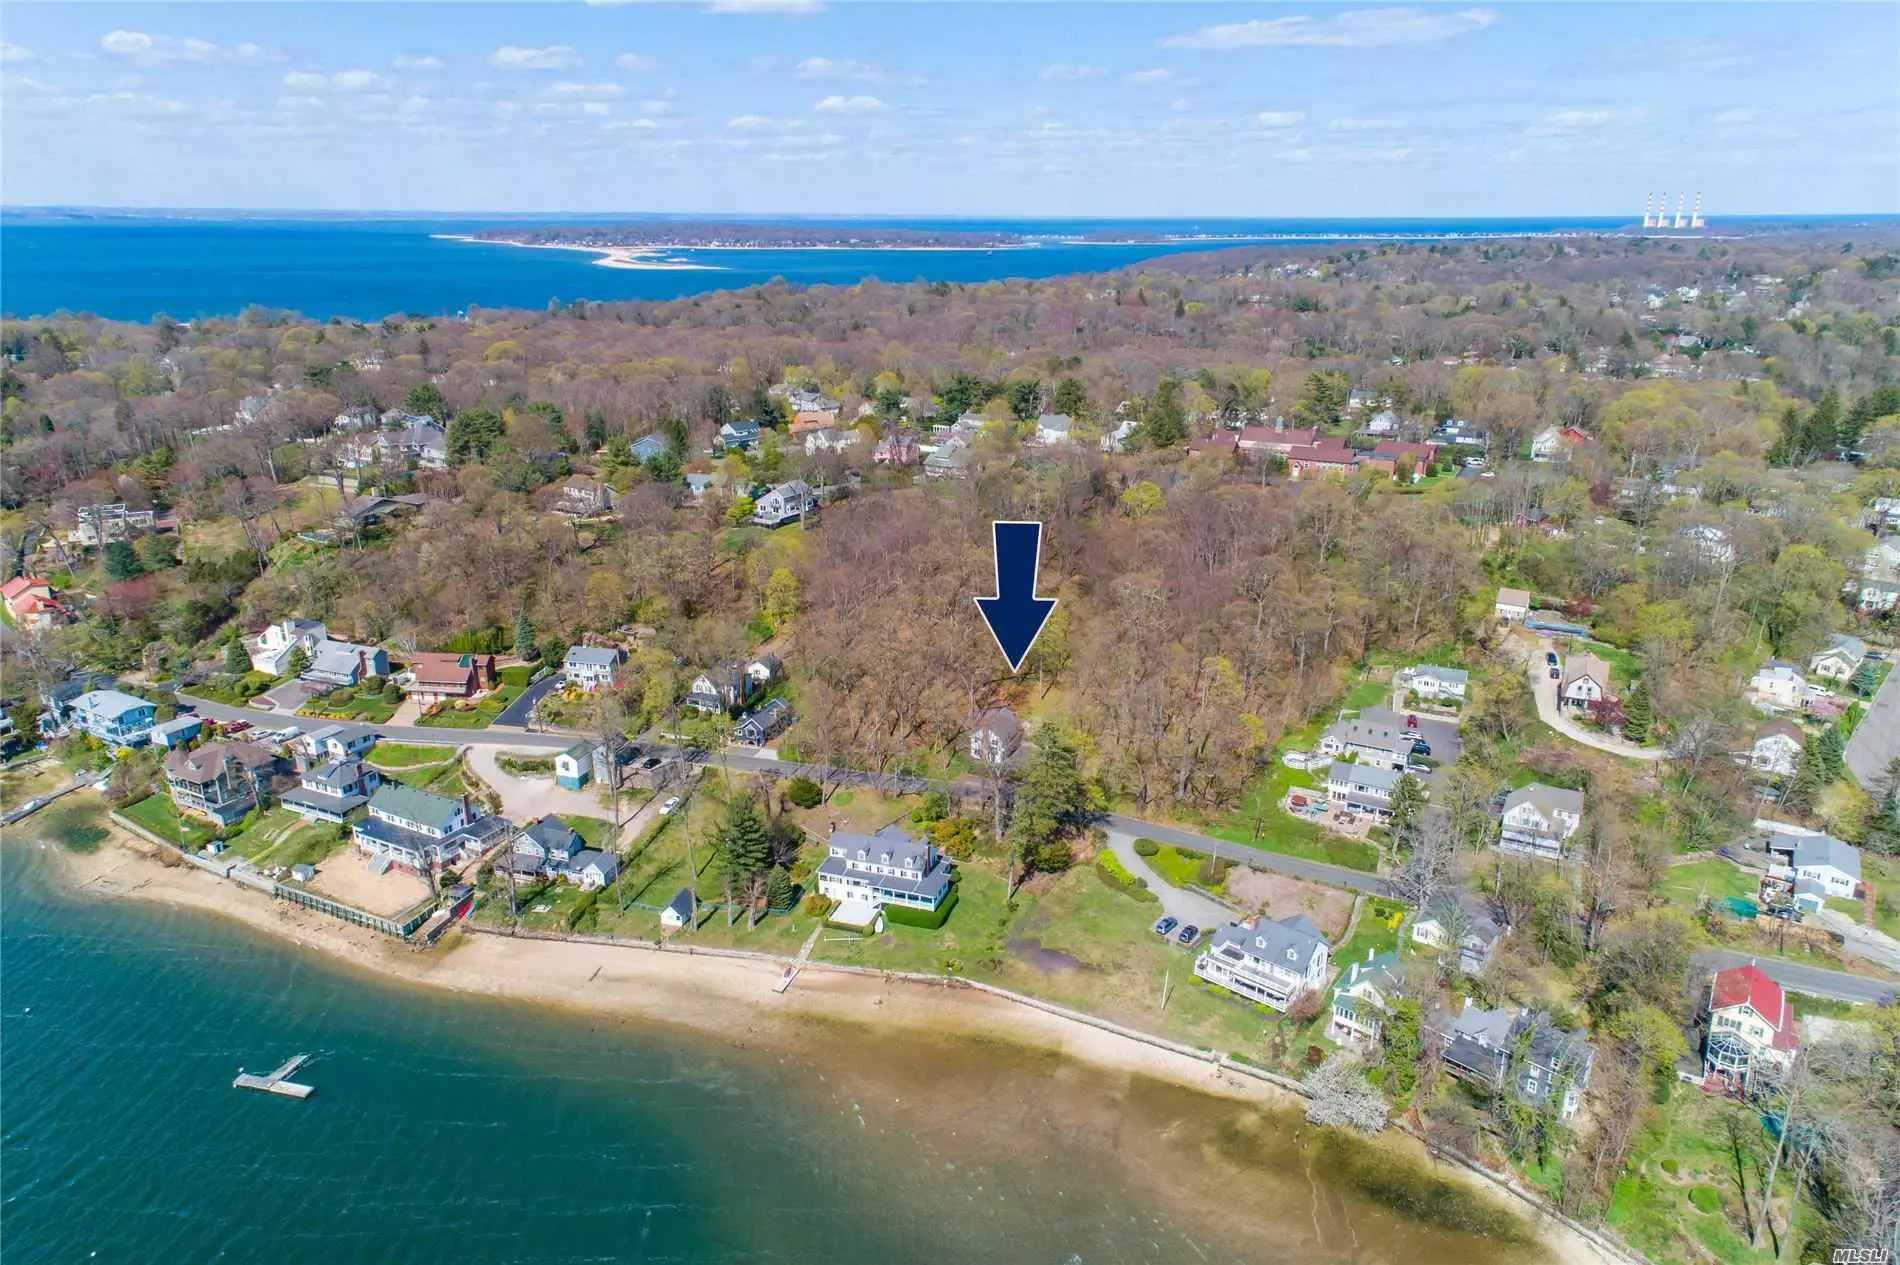 Huntington Harbor Investment Opportunity 3 Land Lots. Water view potential. Fabulous location and privacy. Lot 1 - 1.95 acres Lot 2 - 0.311 acres which included Caretaker Cottage to remain with 3 Car Garage. Lot 3 - 1.92 acres. Plans and Additional Information Upon Request.